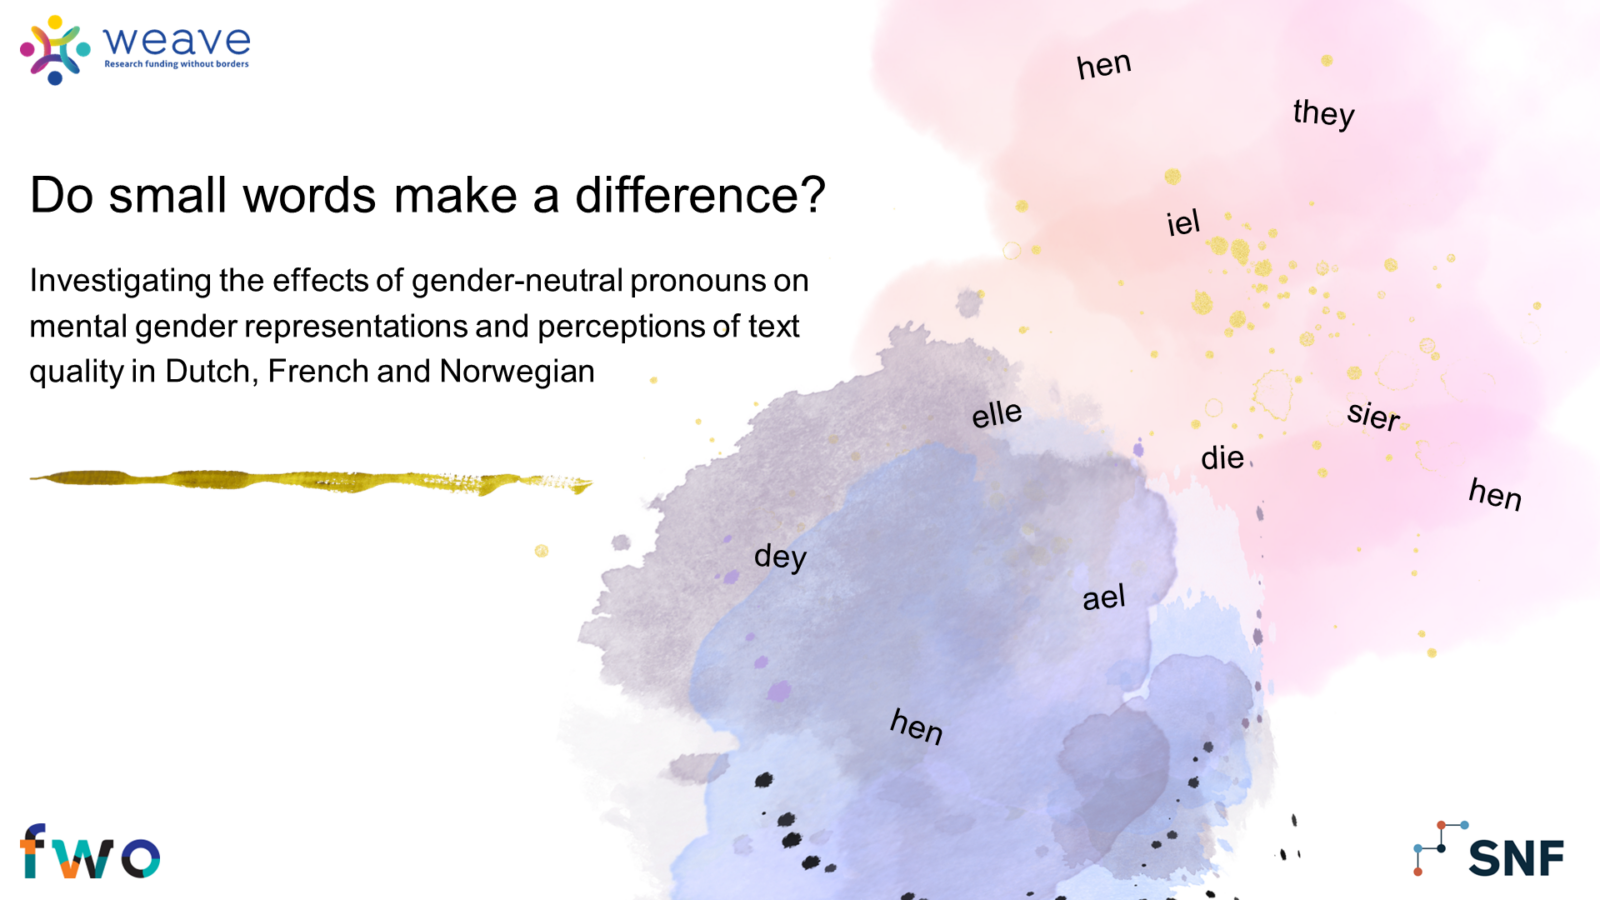 Word cloud of European gender-neutral pronouns, with the title of the project: Do small words make a difference? Investigating the effects of gender-neutral pronouns on mental gender representations and perceptions of text quality in Dutch, French and Norwegian